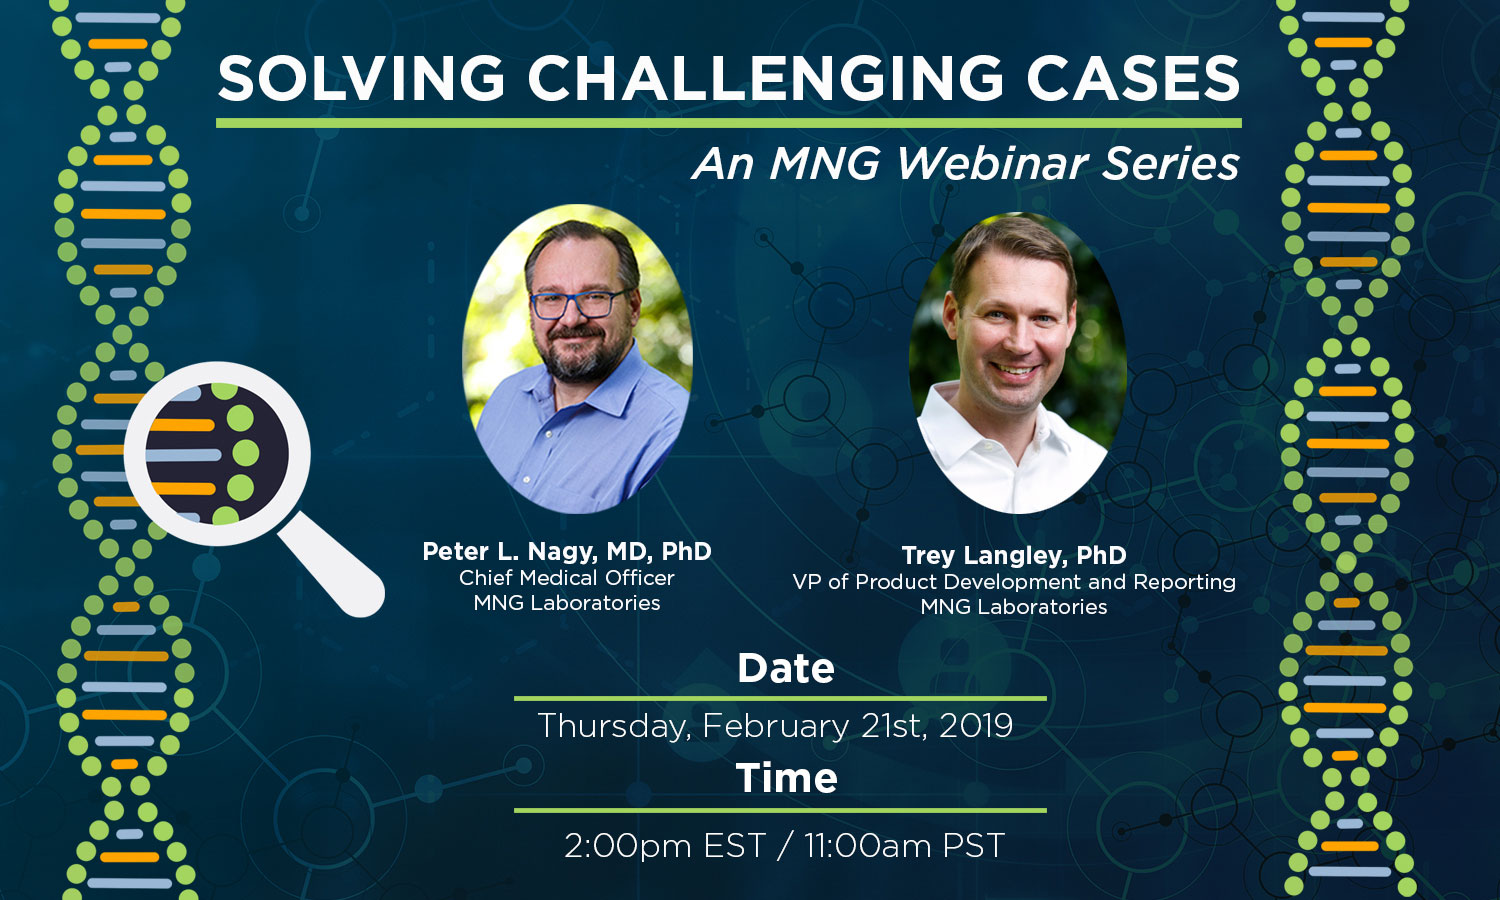 Solving Challenging Cases: An MNG Webinar Series